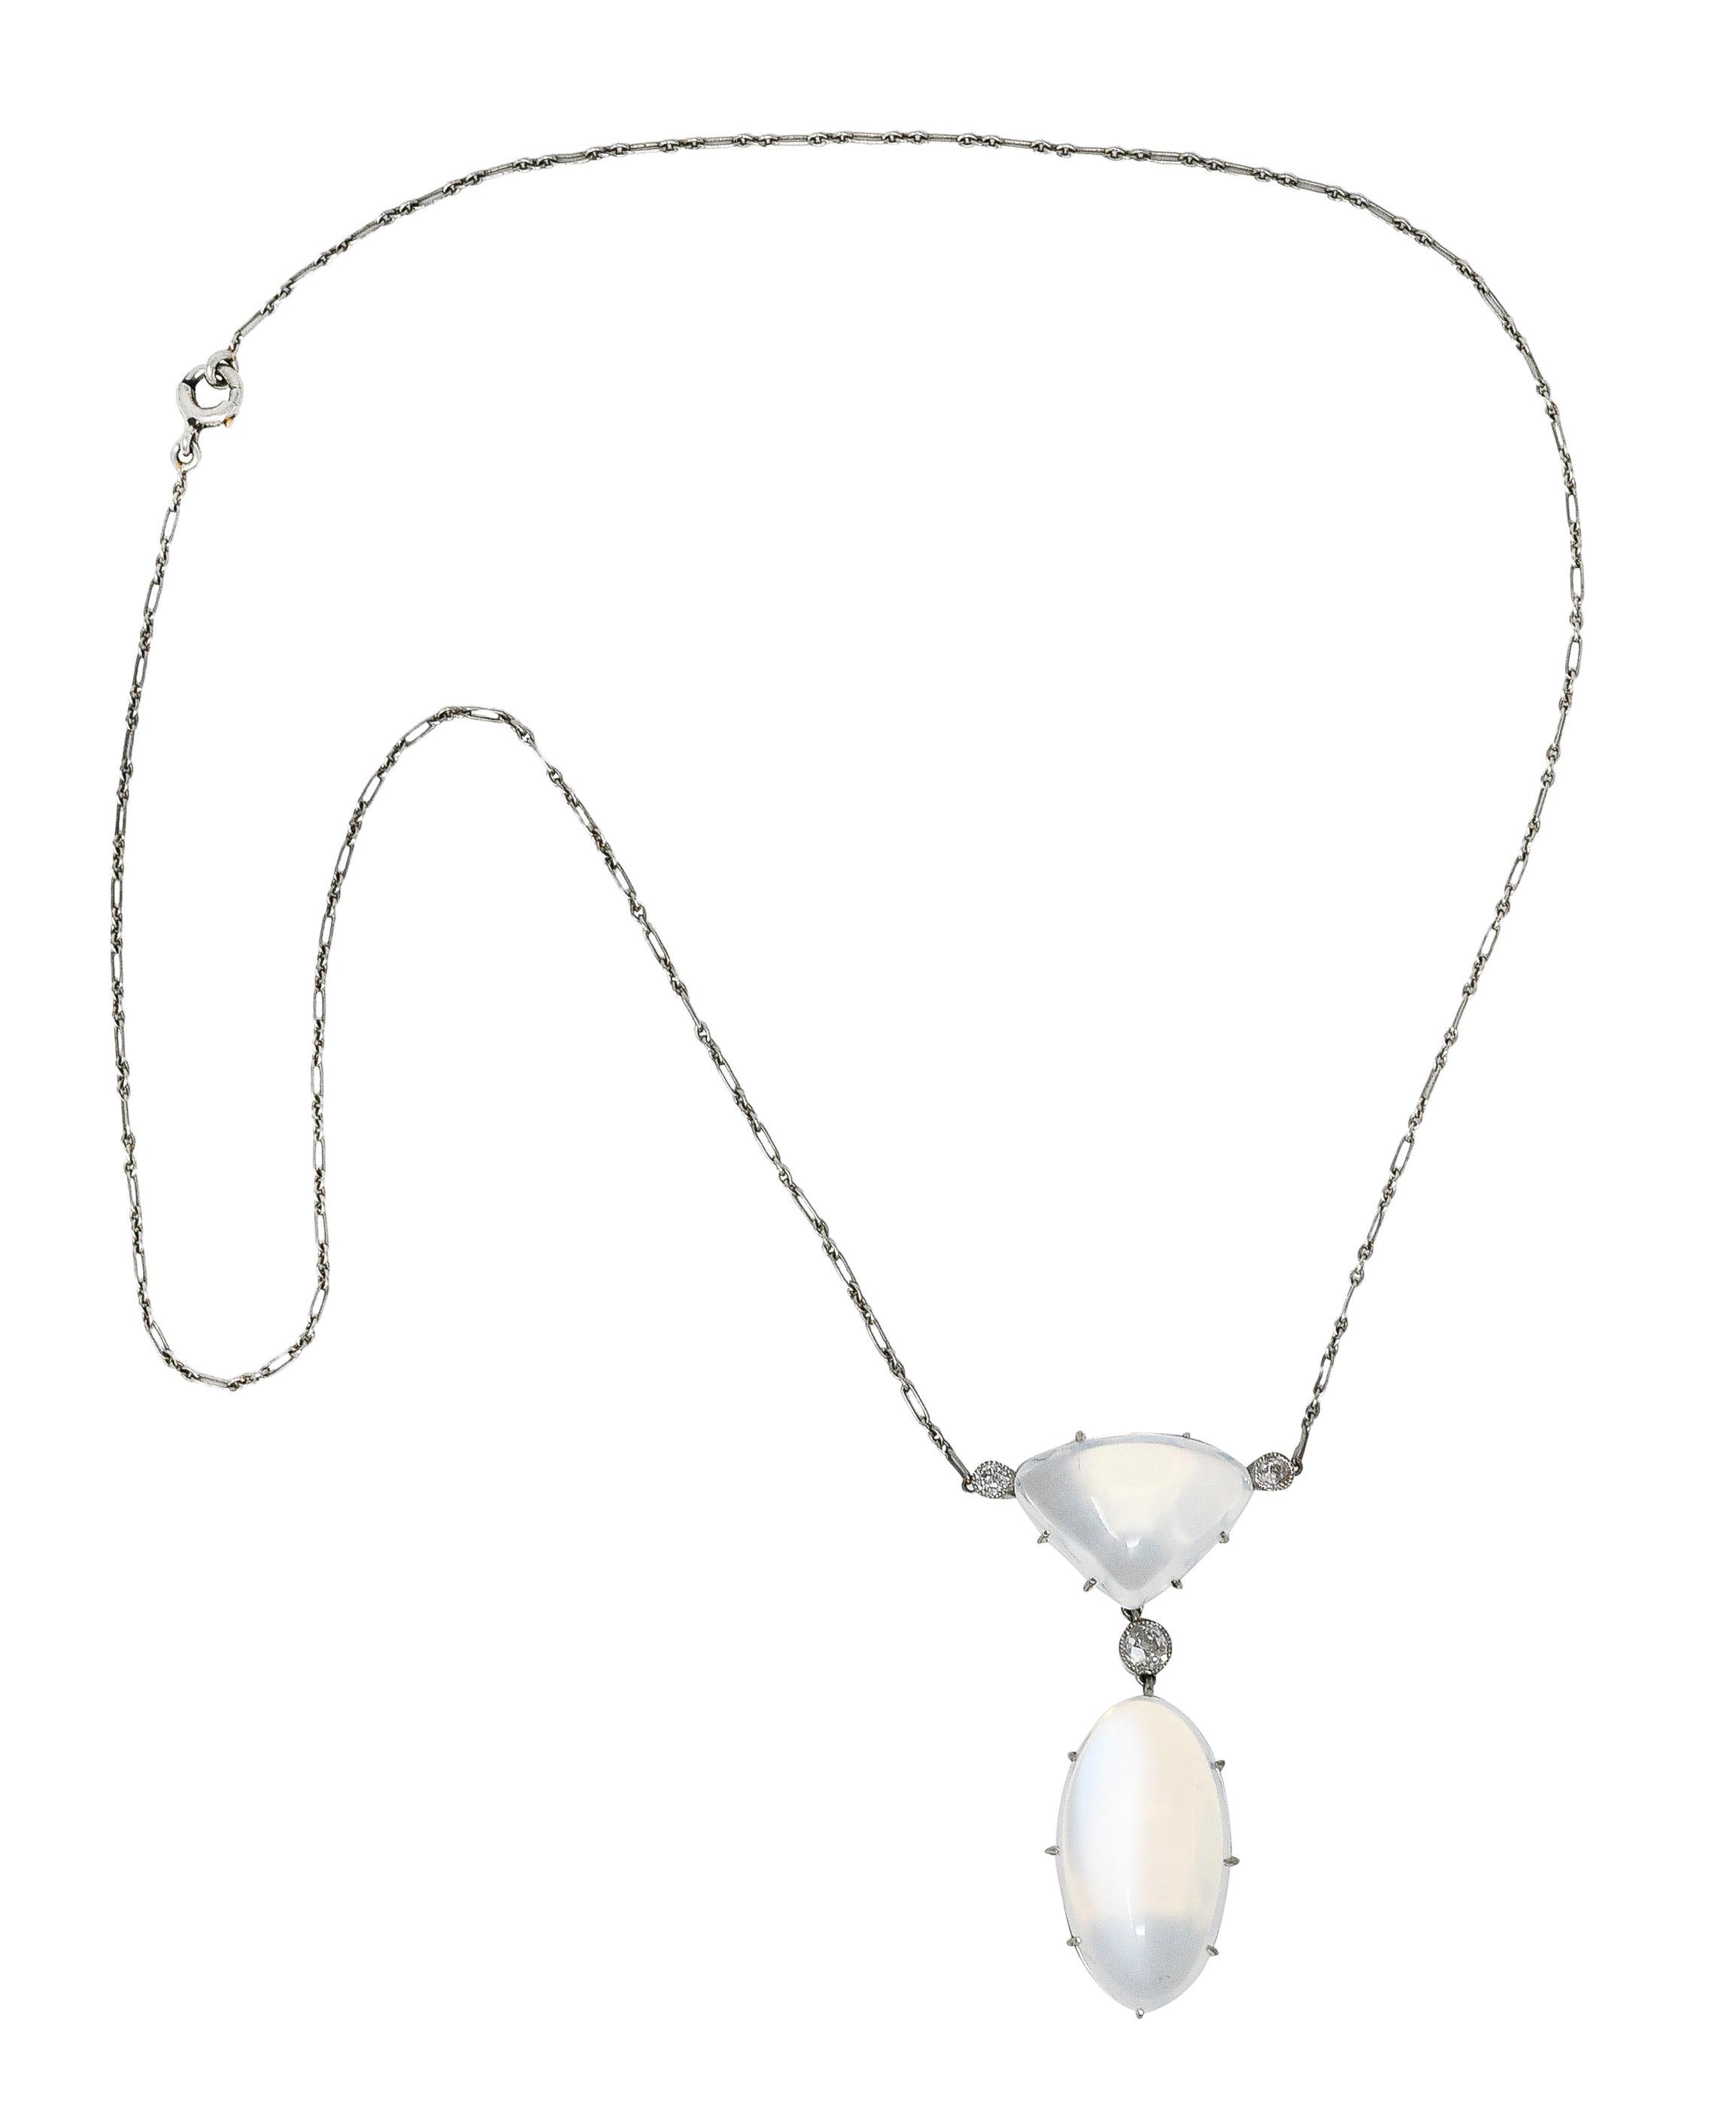 Necklace centers a triangular moonstone cabochon station suspending an oval moonstone drop. Prong set with pierced gallery - measuring 13.0 x 17.0 mm and 13.0 x 23.0 mm, respectively. Translucent white in body color with white adularescence and